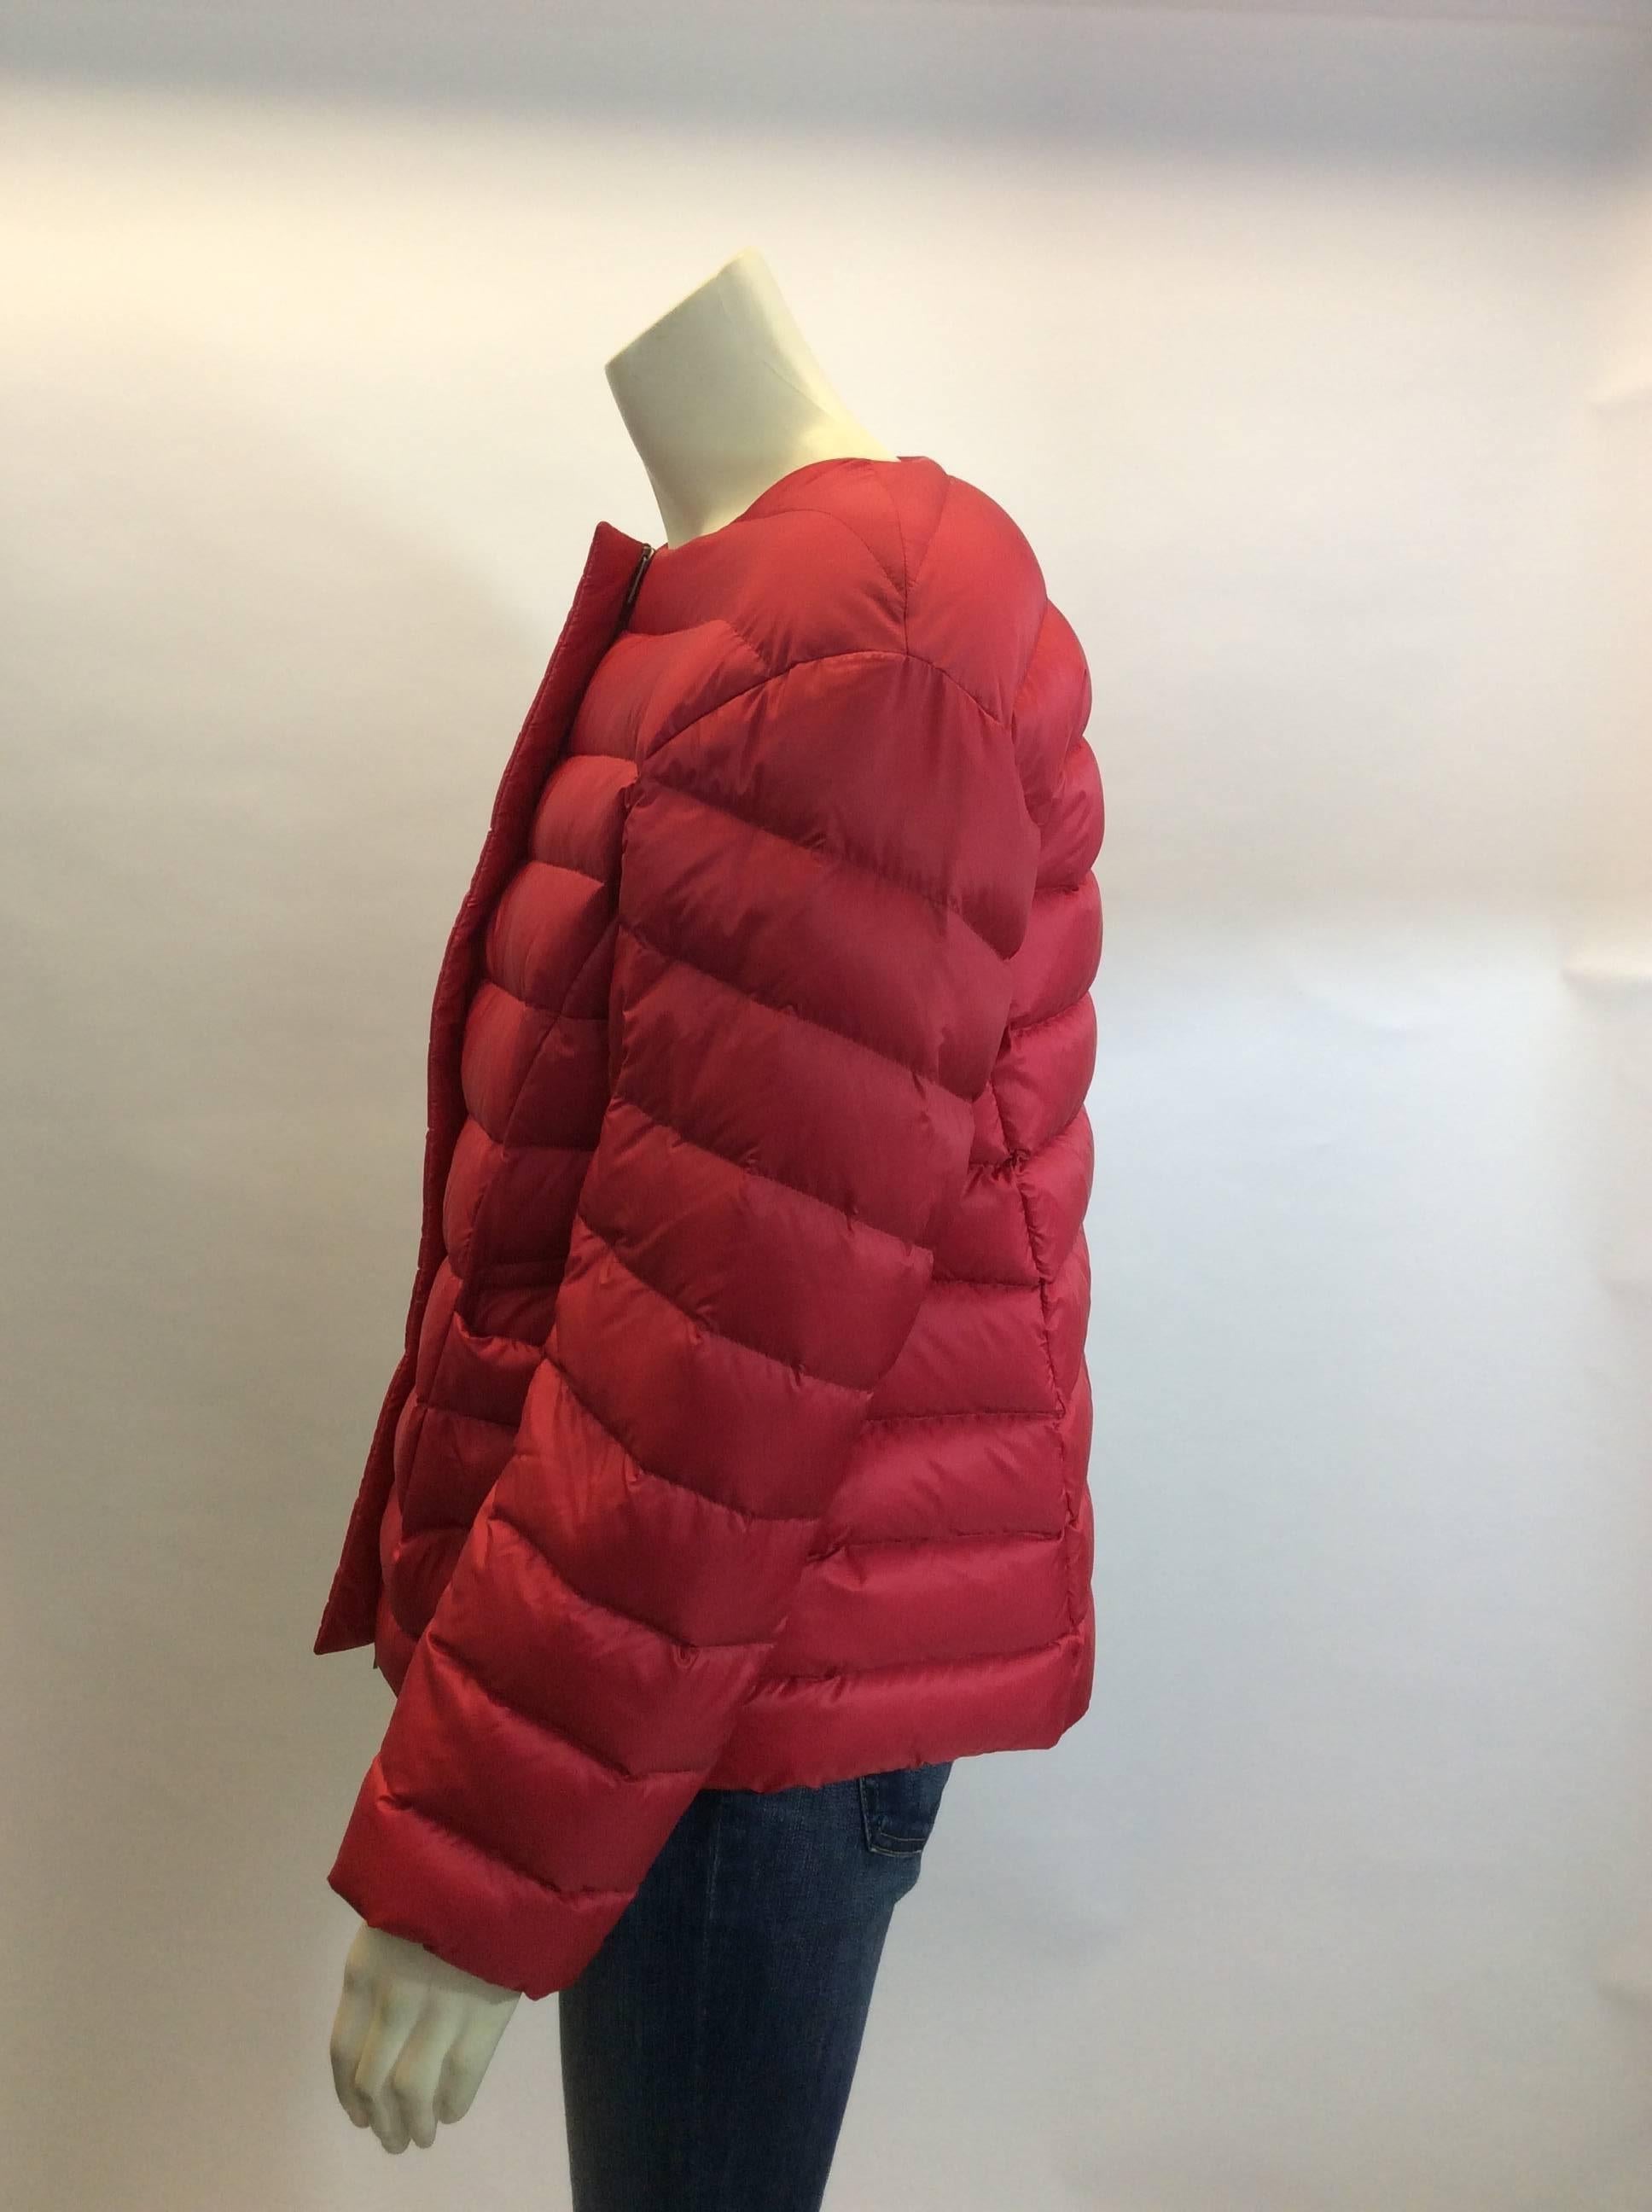 Jil Sander Red Down Jacket
Zip up jacket with two exterior pockets
Polyester lining
Down filled
Made in Italy 
Size 36
$325